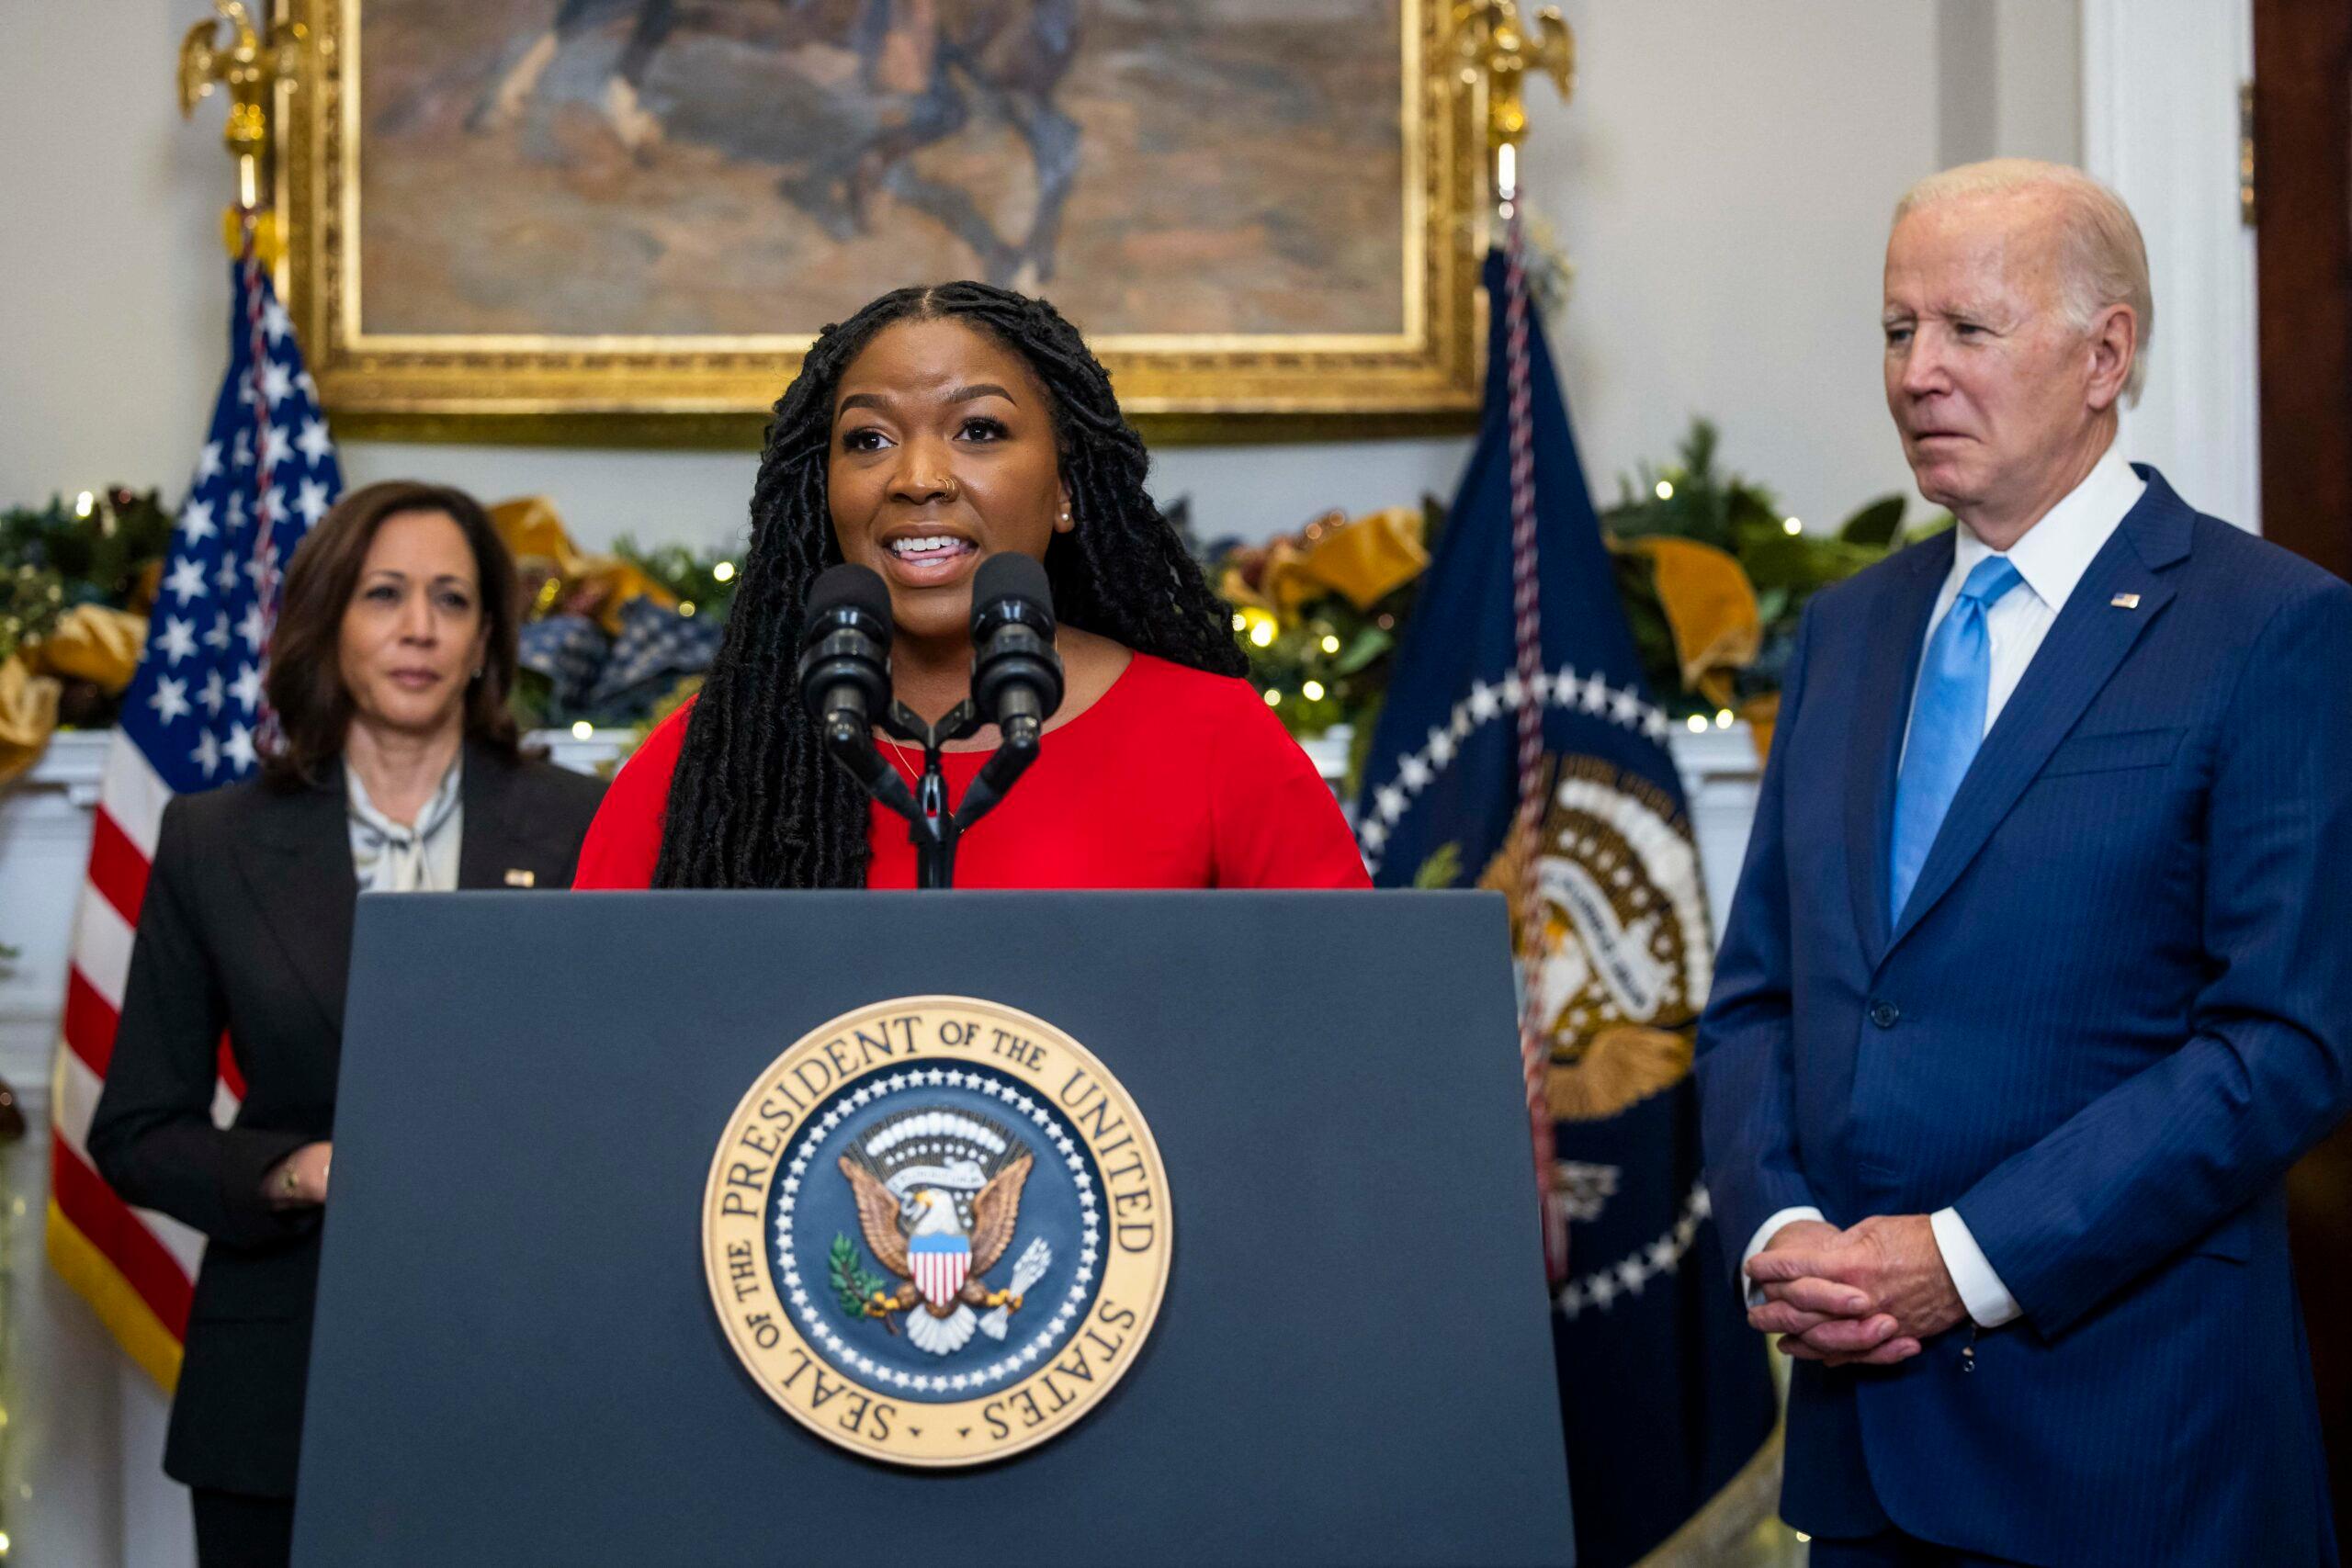 United States President Joe Biden, alongside Cherelle Griner, prepares to announce a prisoner exchange with Russia from the Roosevelt Room of the White House in Washington, DC, USA, 08 December 2022.United States President Joe Biden, alongside Cherelle Griner, prepares to announce a prisoner exchange with Russia from the Roosevelt Room of the White House in Washington, DC, USA, 08 December 2022.